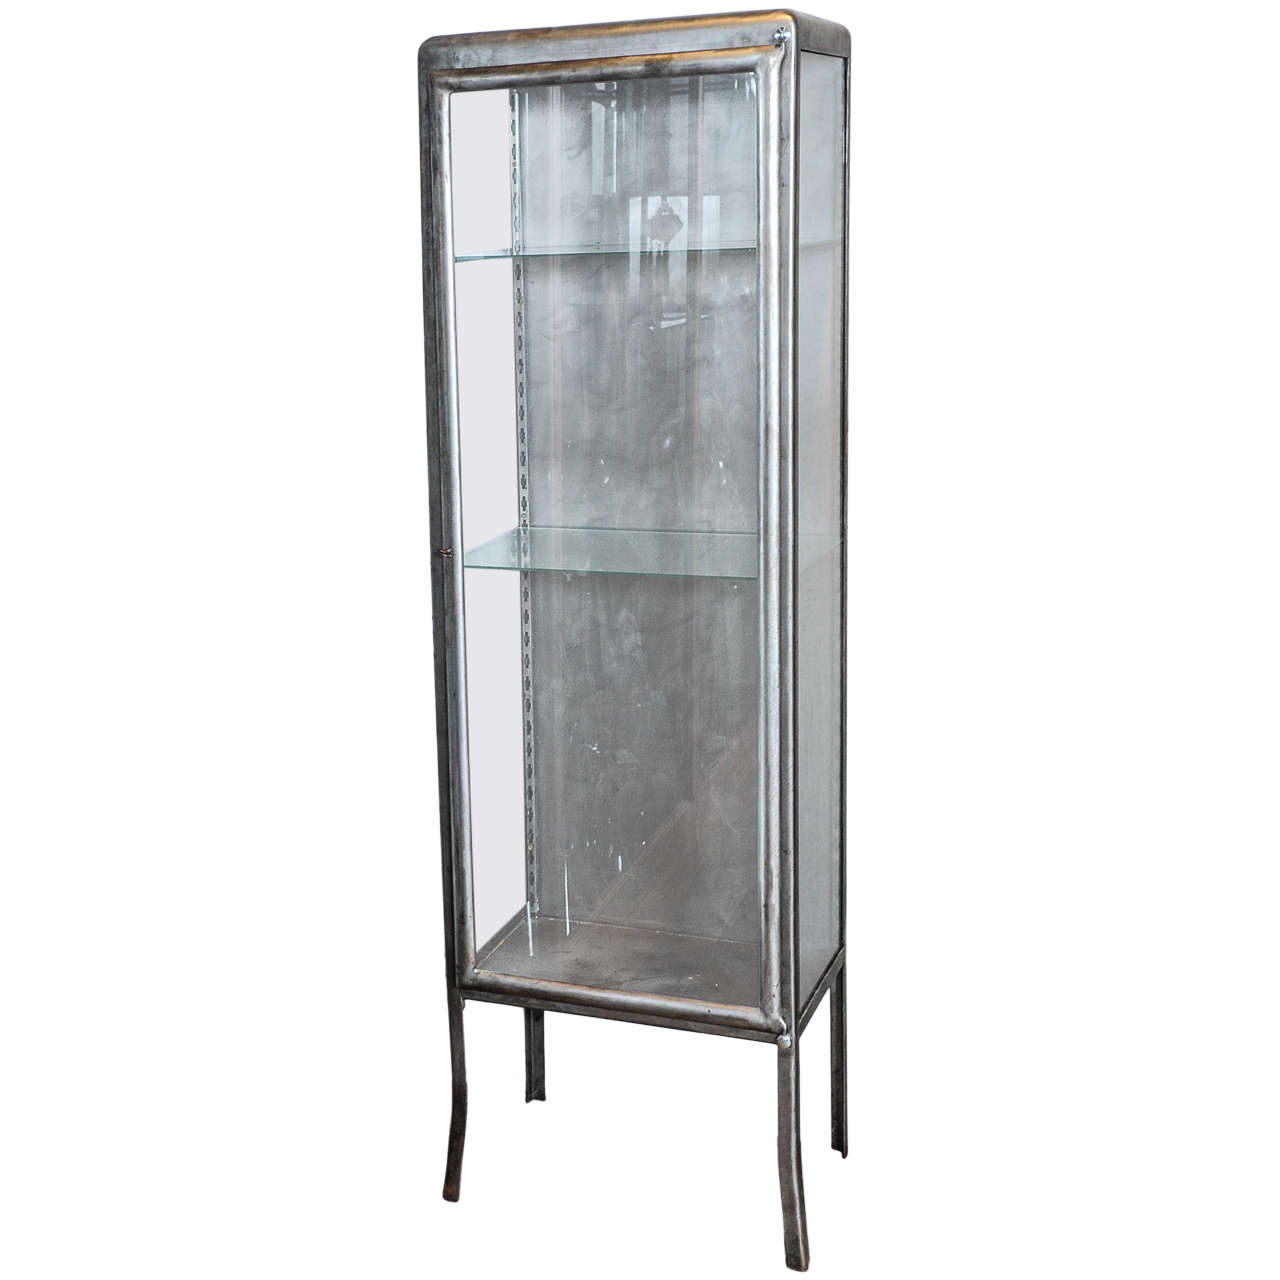 A 1930s French wrought iron and glass display cabinet / vitrine